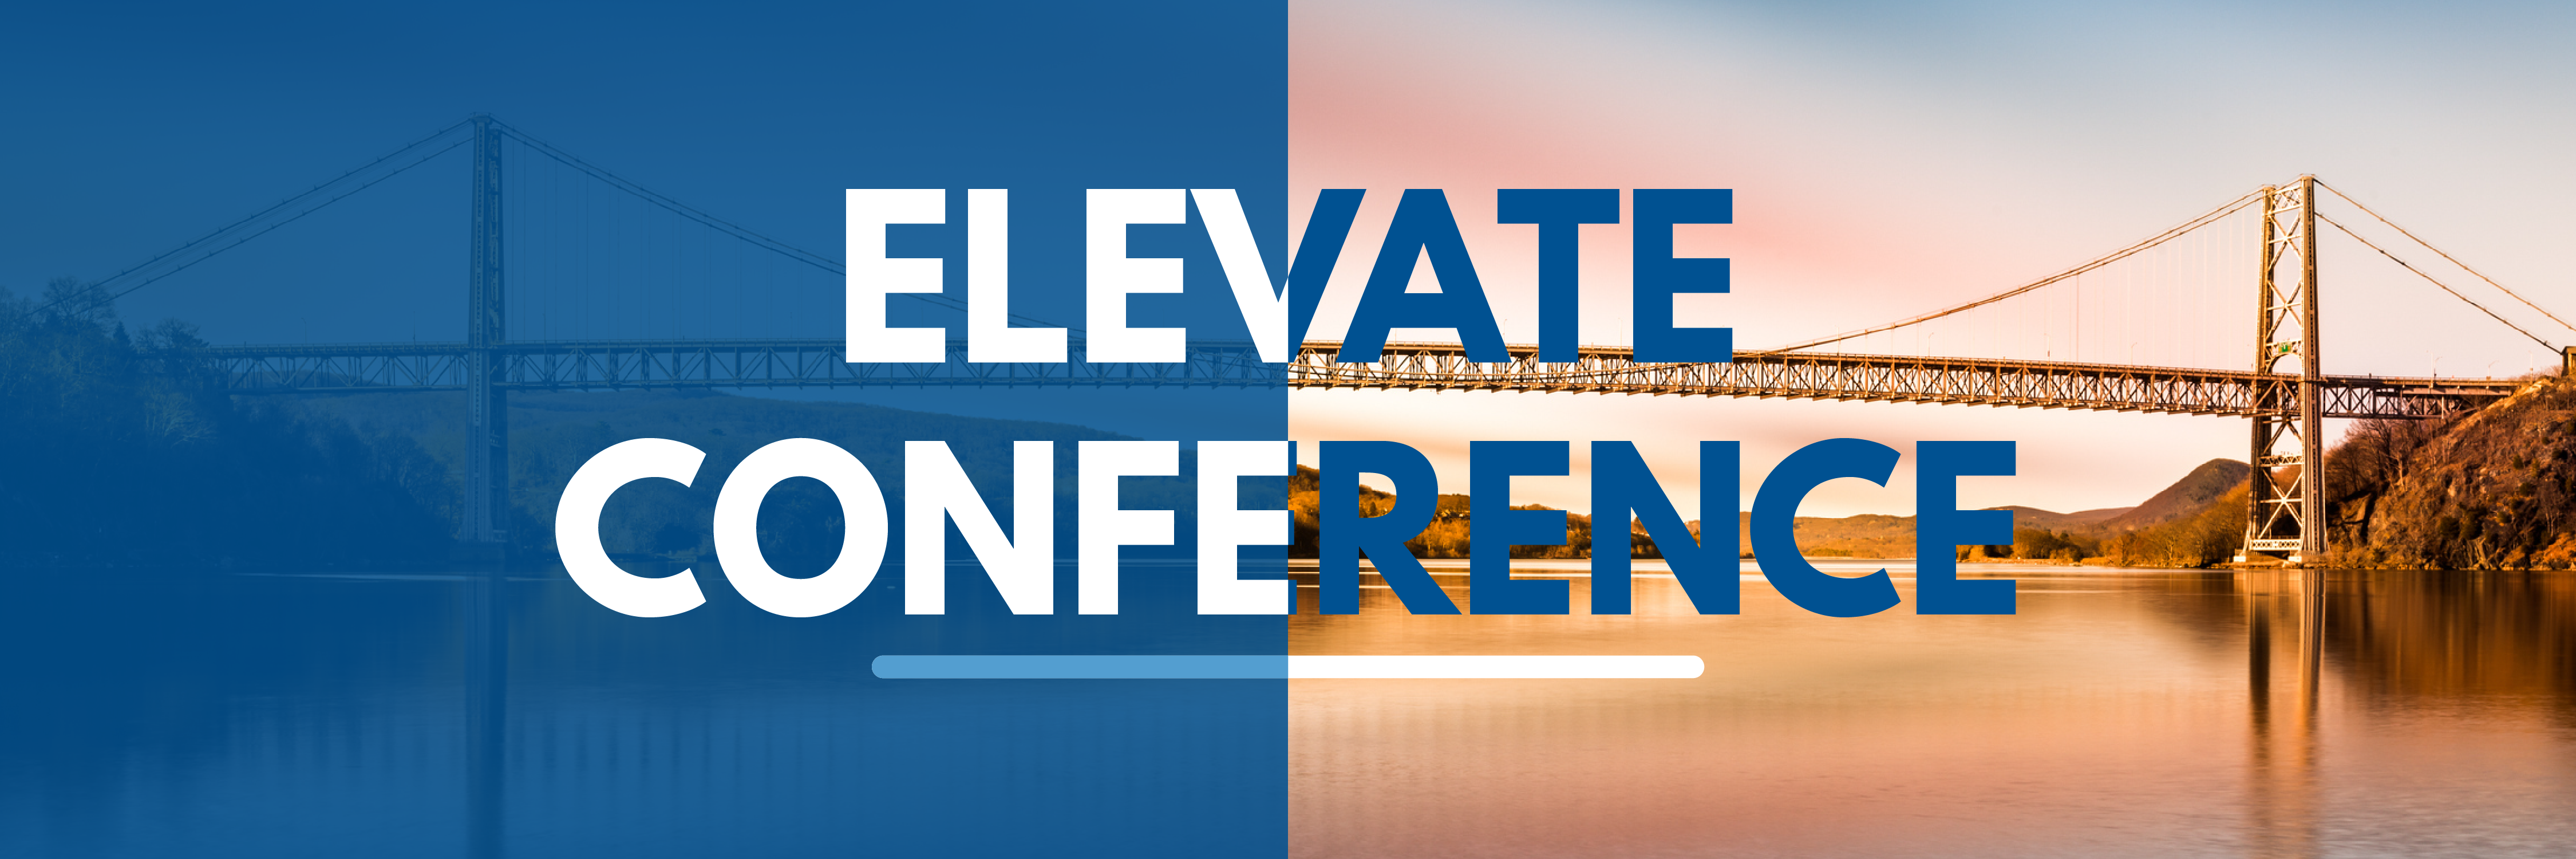 Elevate Conference Page Banner